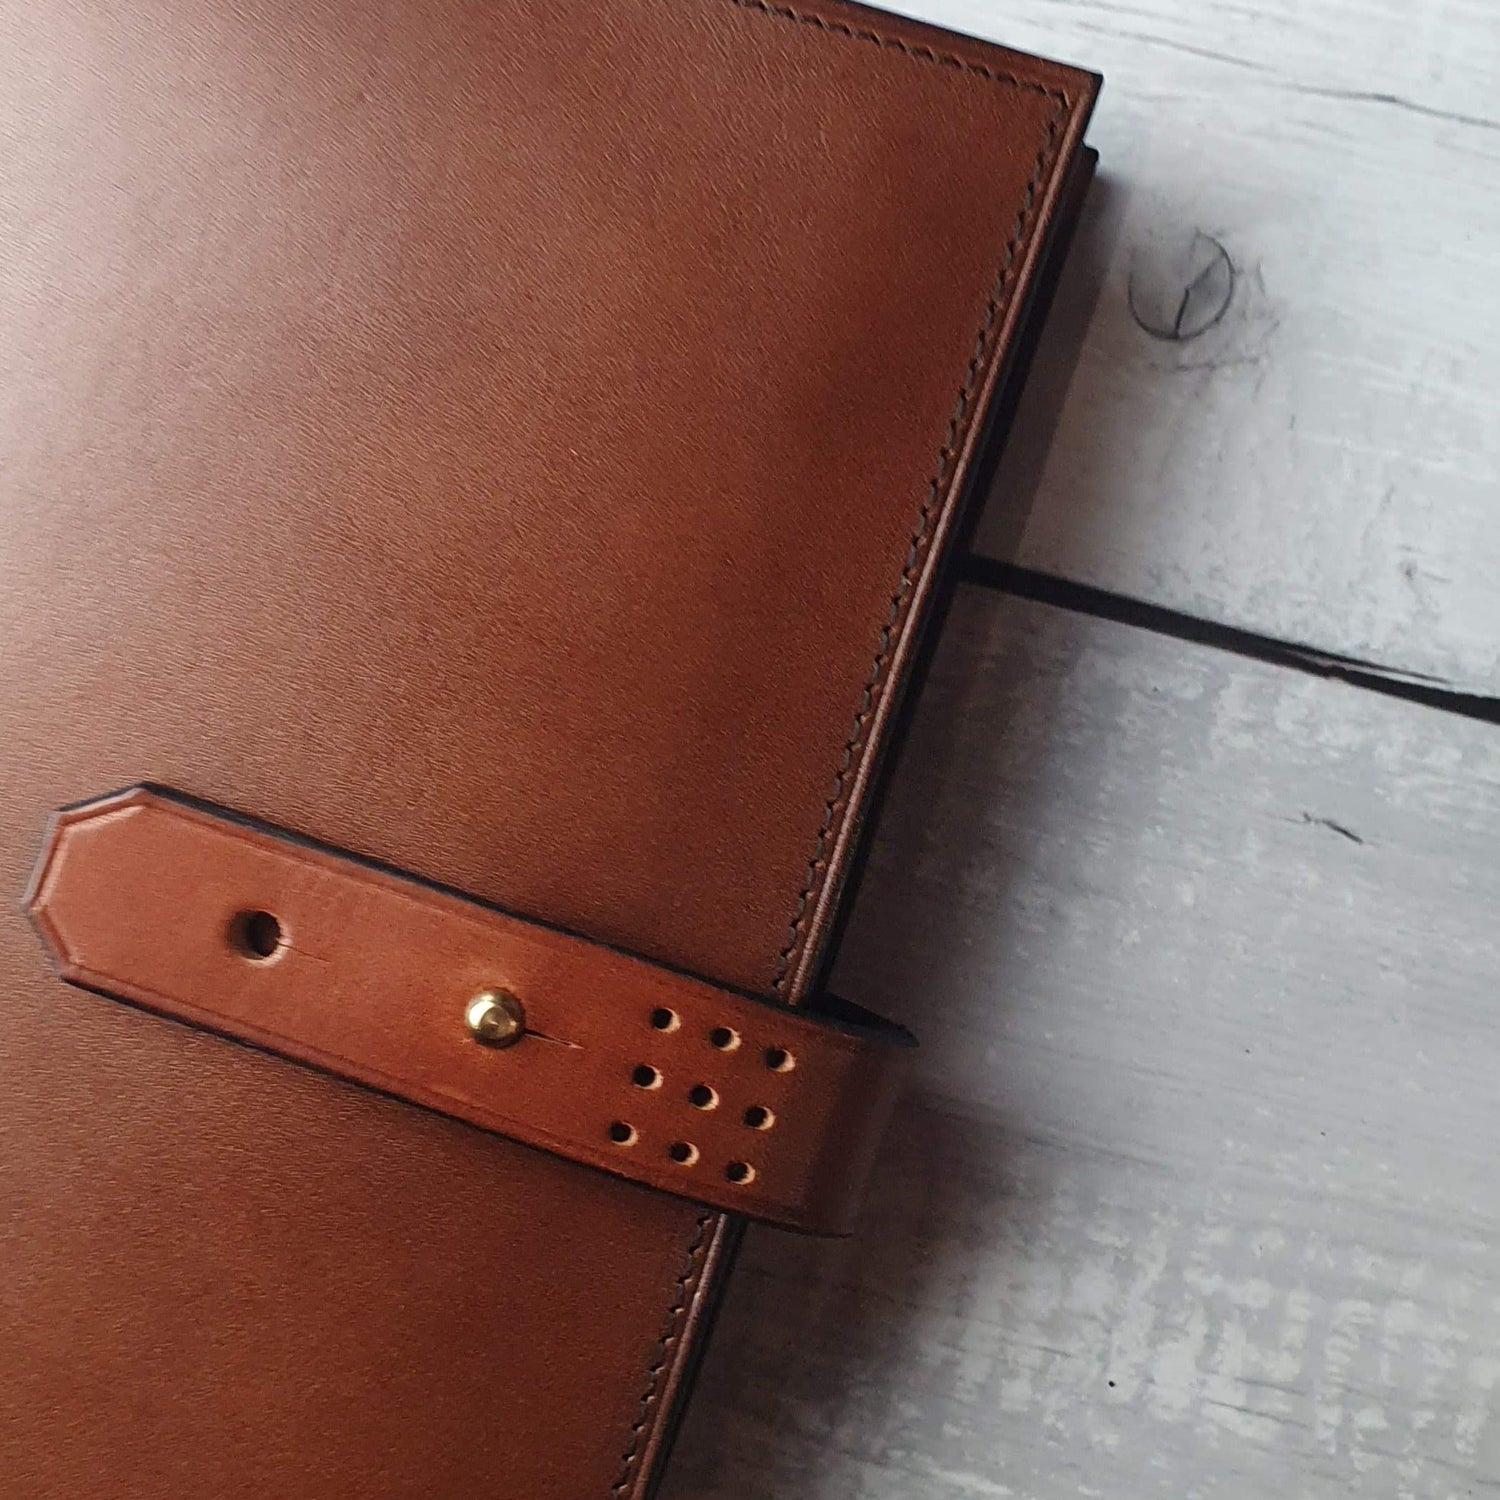 Hands of Tym Notebooks & Notepads Tan / Tan with Gold stud / Ruled 'Laurel' The Bespoke Handmade Luxury Leather Notebook / Diary A6